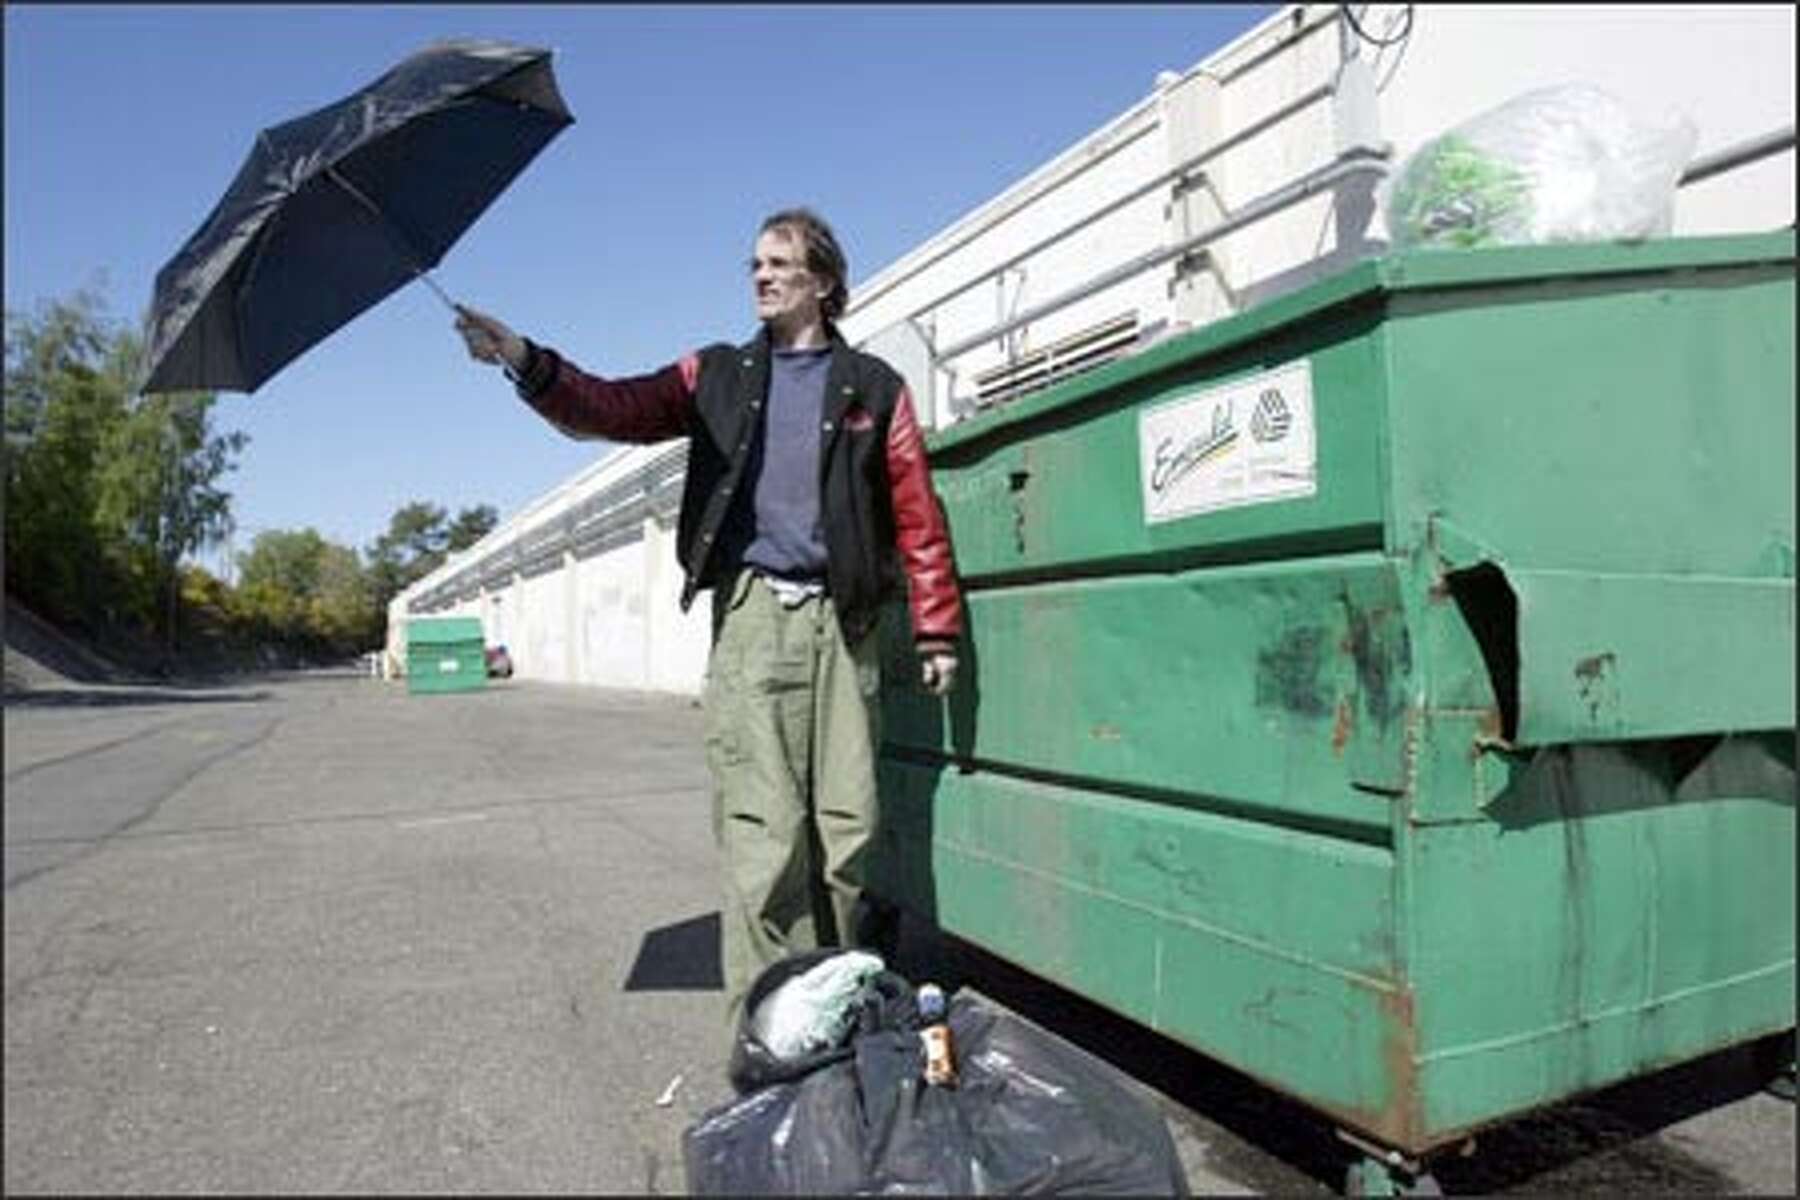 Reliable Dumpster Bag Services in In Snohomish, WA